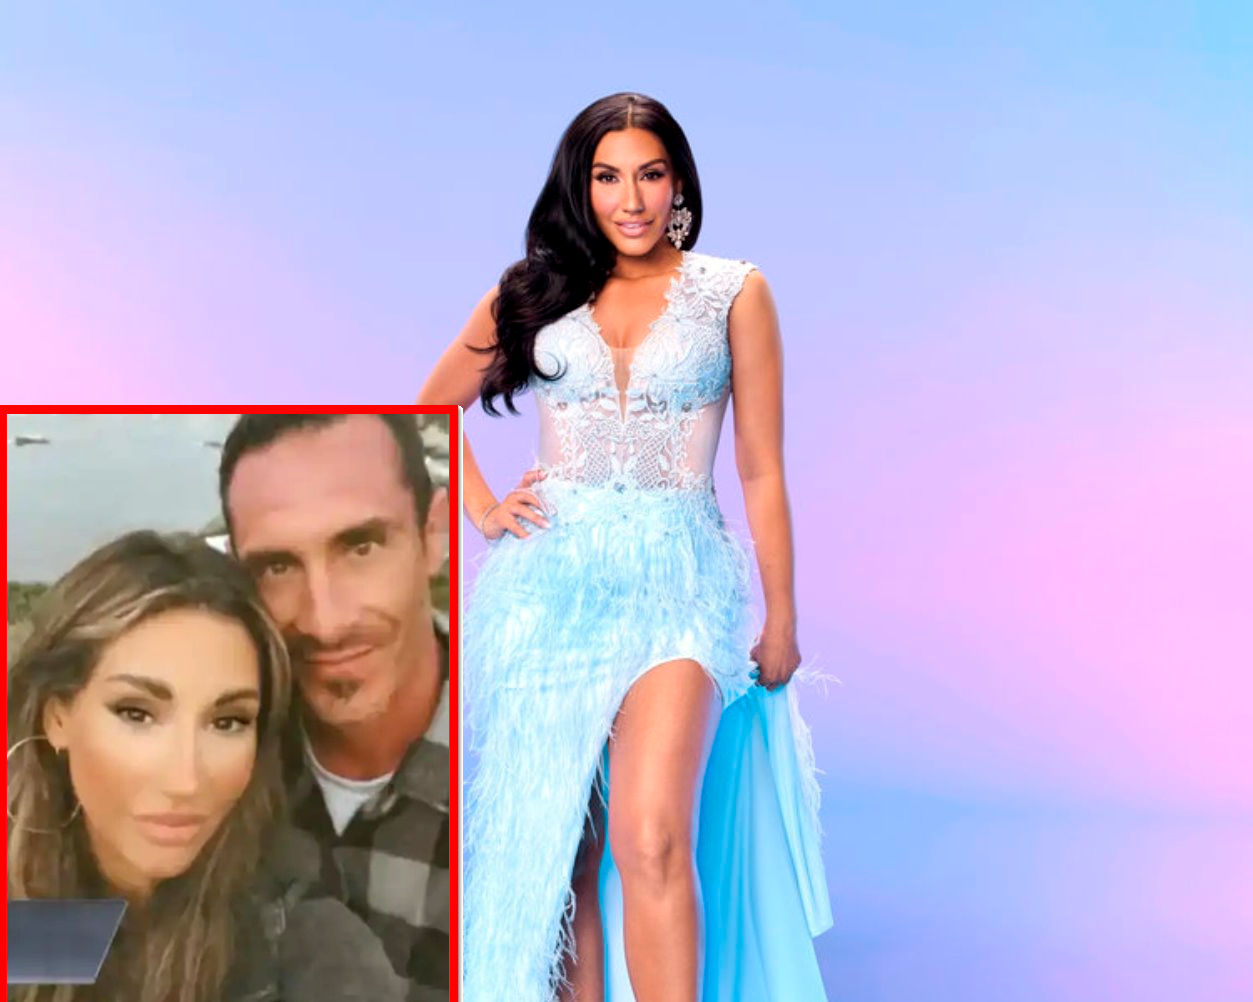 RHOSLC's Monica Garcia Shares Status With Ex-Husband Mike as Her Salary and Divorce Details are Revealed, Plus She Teases Shocking Reason for Split, Affair With Brother-in-Law, and Live Viewing Thread